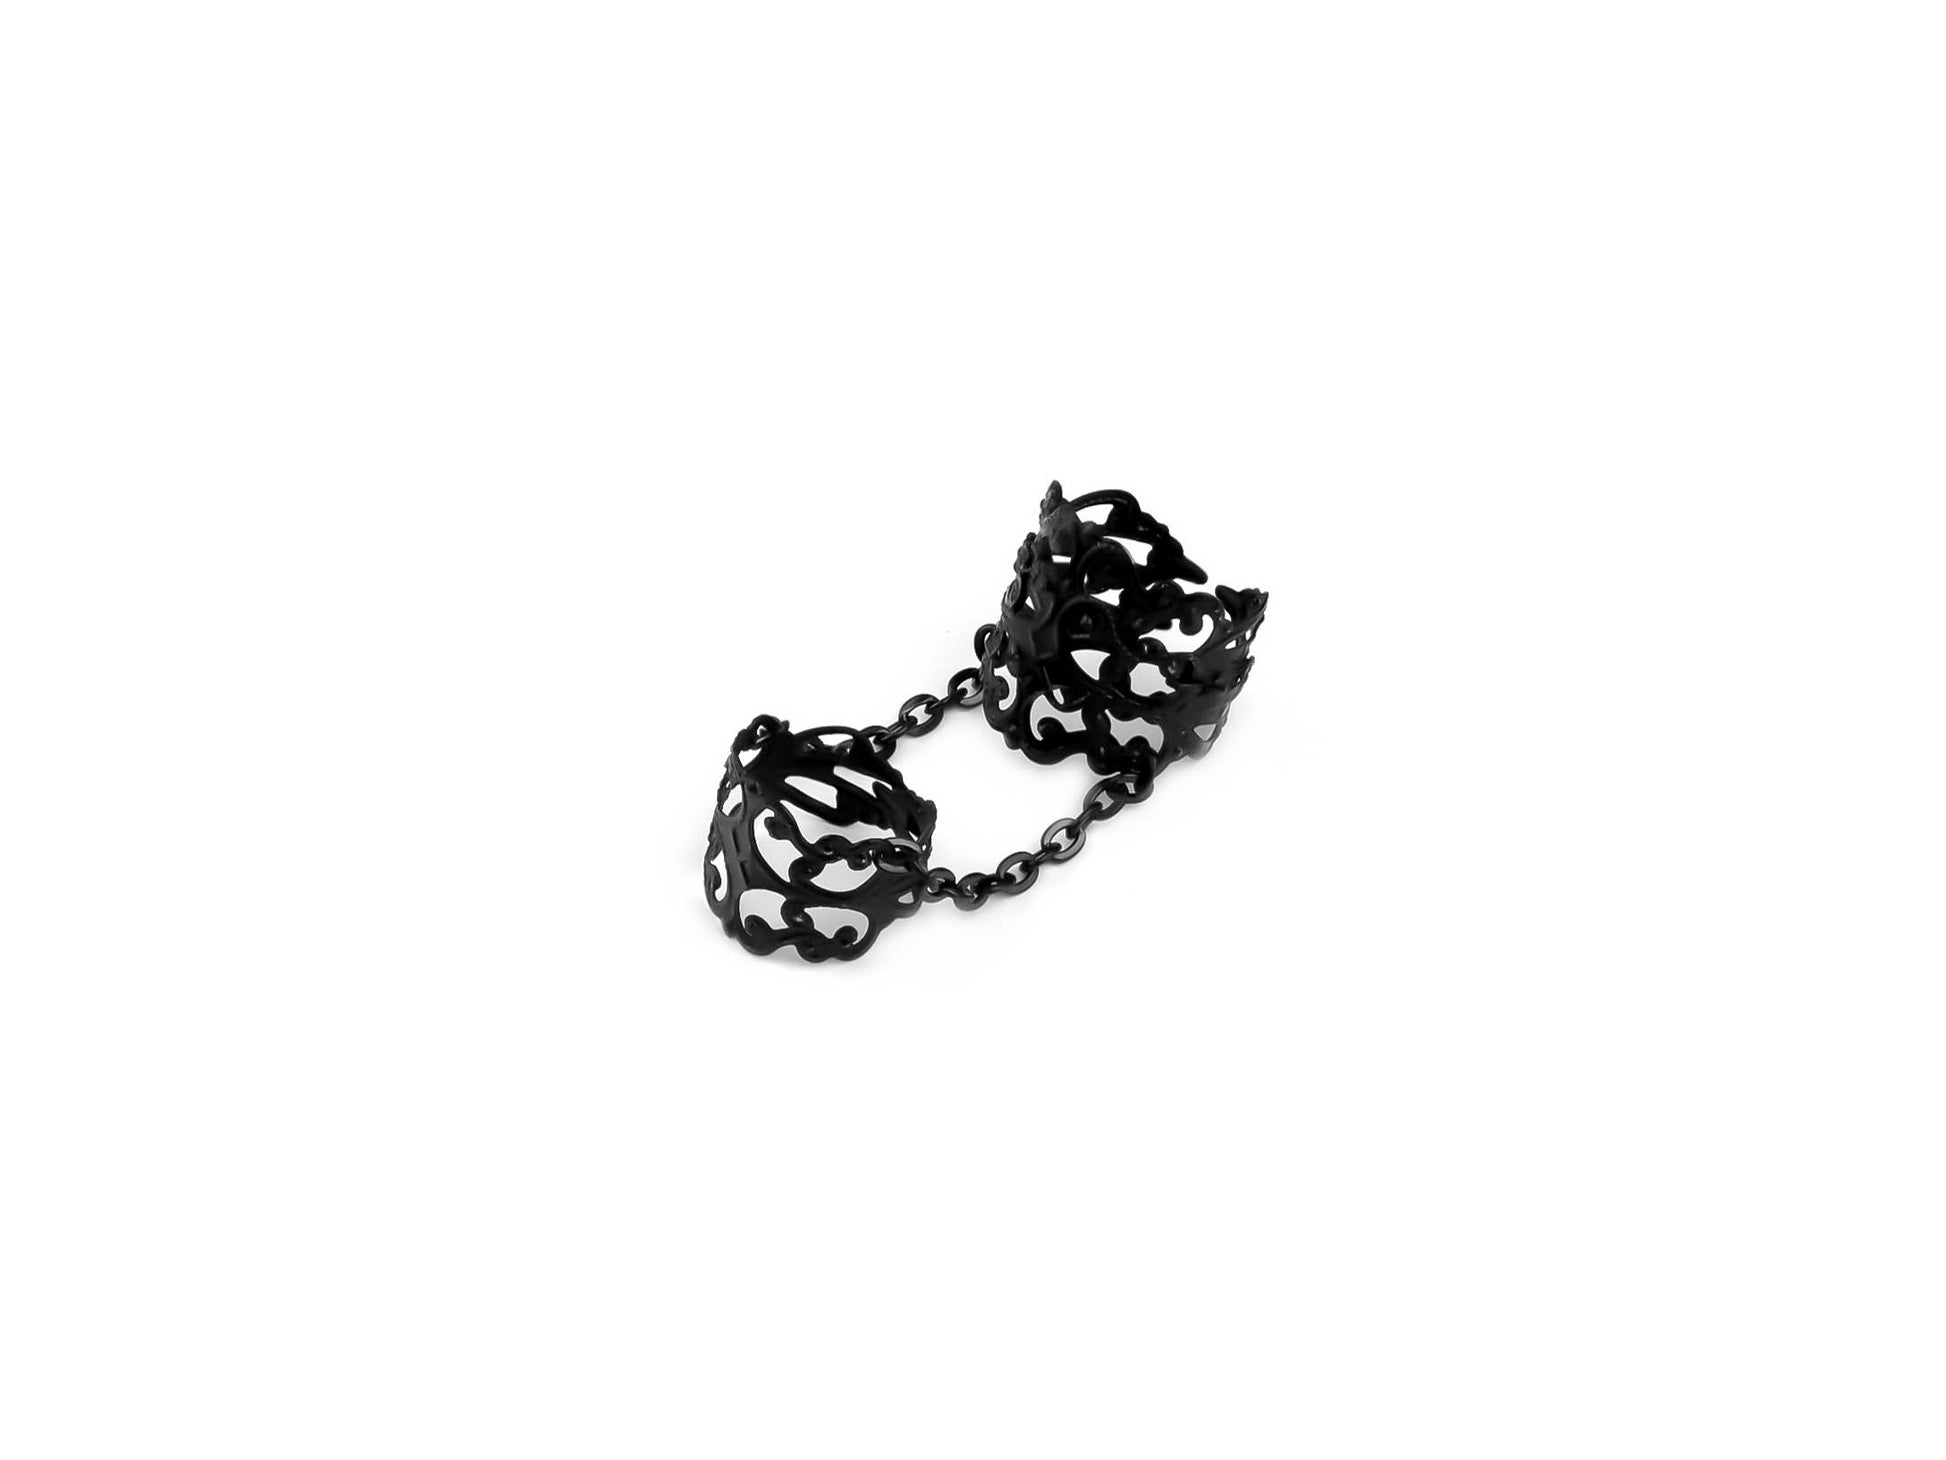 Elegant Myril Jewels black double ring, crafted in a neo-gothic style. A statement piece for Halloween, Witchcore, or daily wear, merging punk accents with gothic-chic. Perfect for those seeking bold jewelry, from rave parties to everyday elegance. Ideal gift for a goth girlfriend.